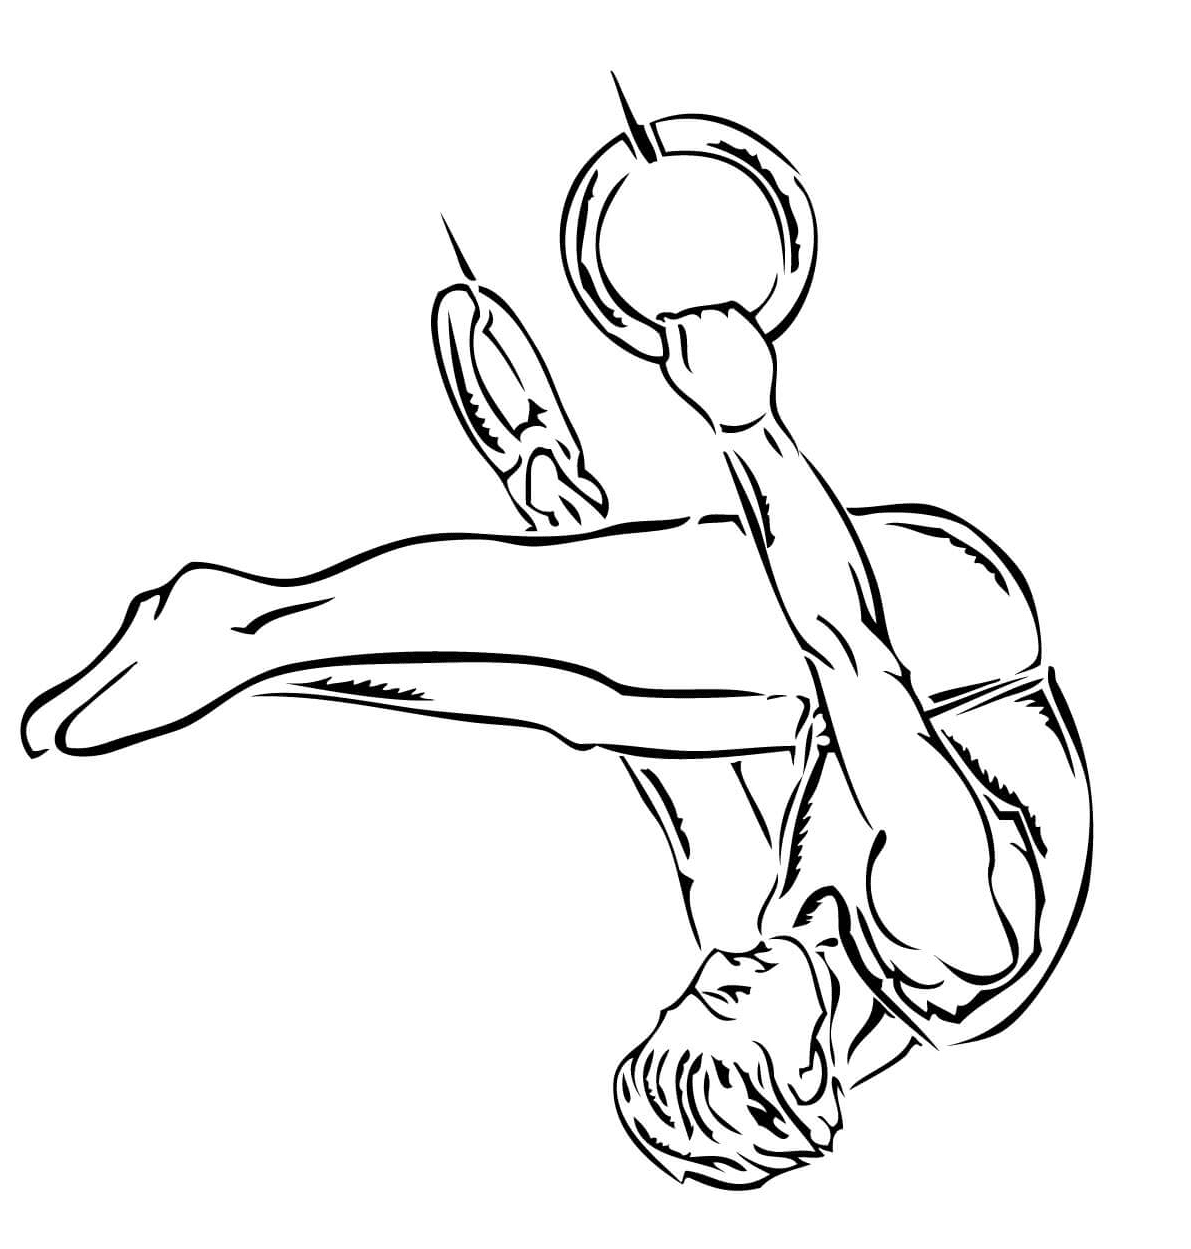 Gymnastic Ring Performance to Print Coloring Pages